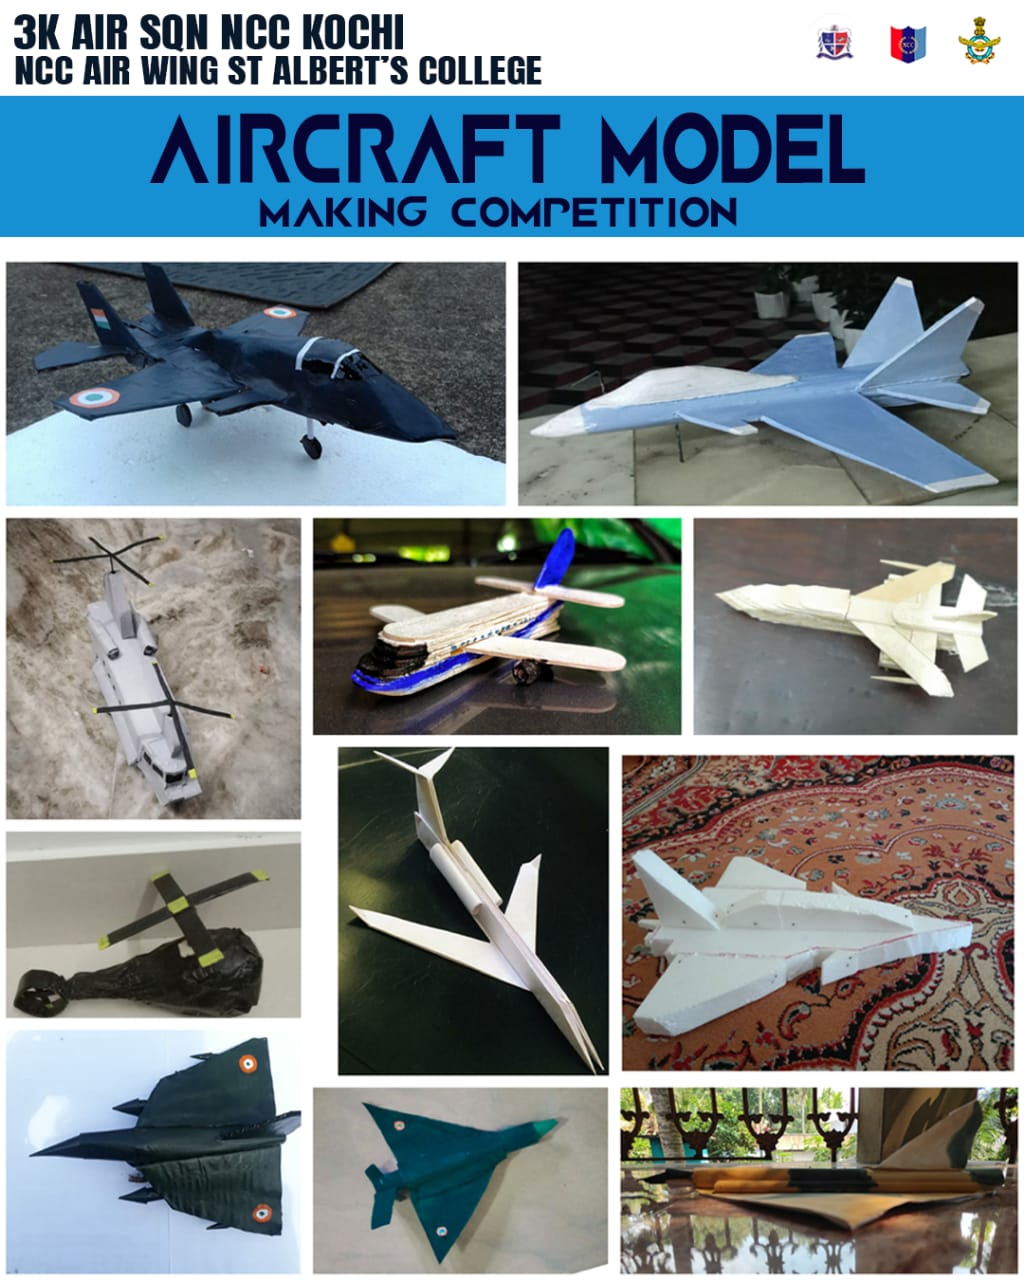 Aircraft Model making competition